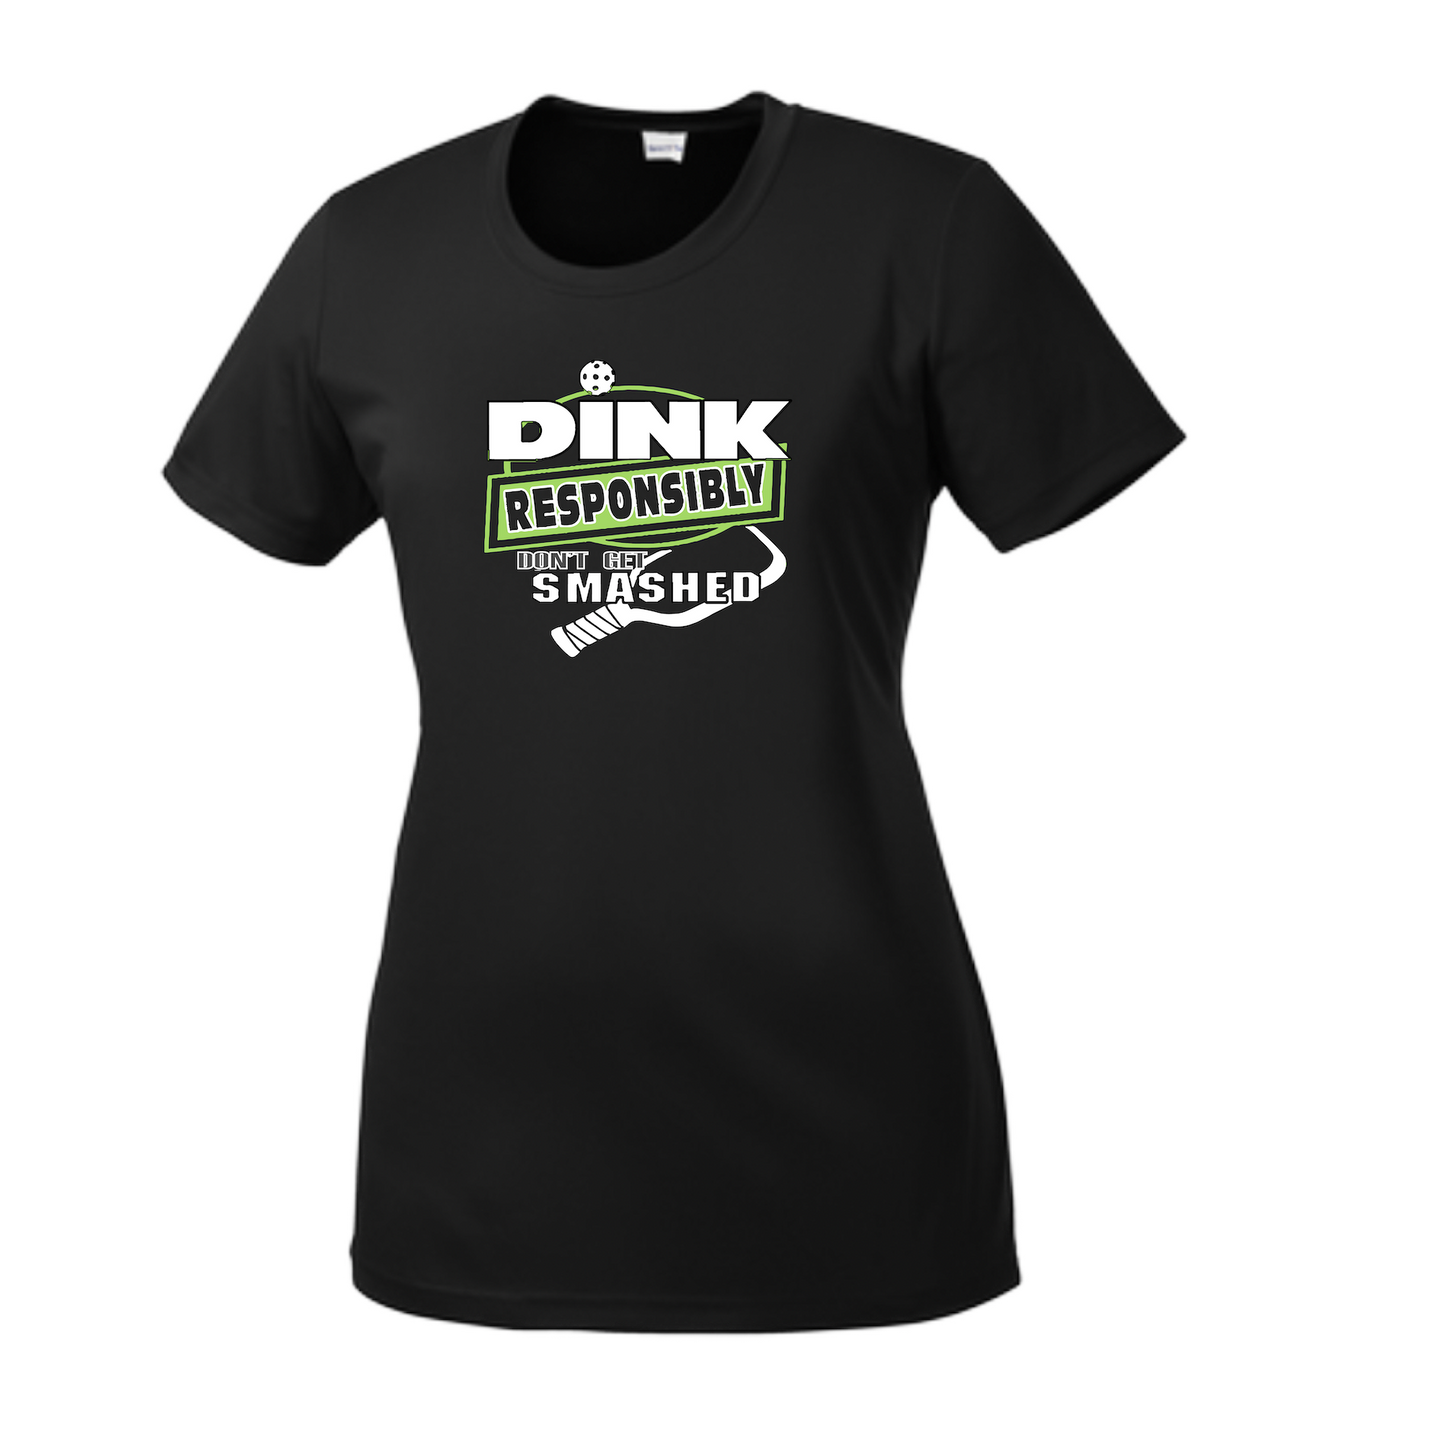 Pickleball Design: Dink Responsibly - Don't Get Smashed  Women's Style:  Short-Sleeve Crew-Neck  Shirts are lightweight, roomy and highly breathable. These moisture-wicking shirts are designed for athletic performance. They feature PosiCharge technology to lock in color and prevent logos from fading. Removable tag and set-in sleeves for comfort.